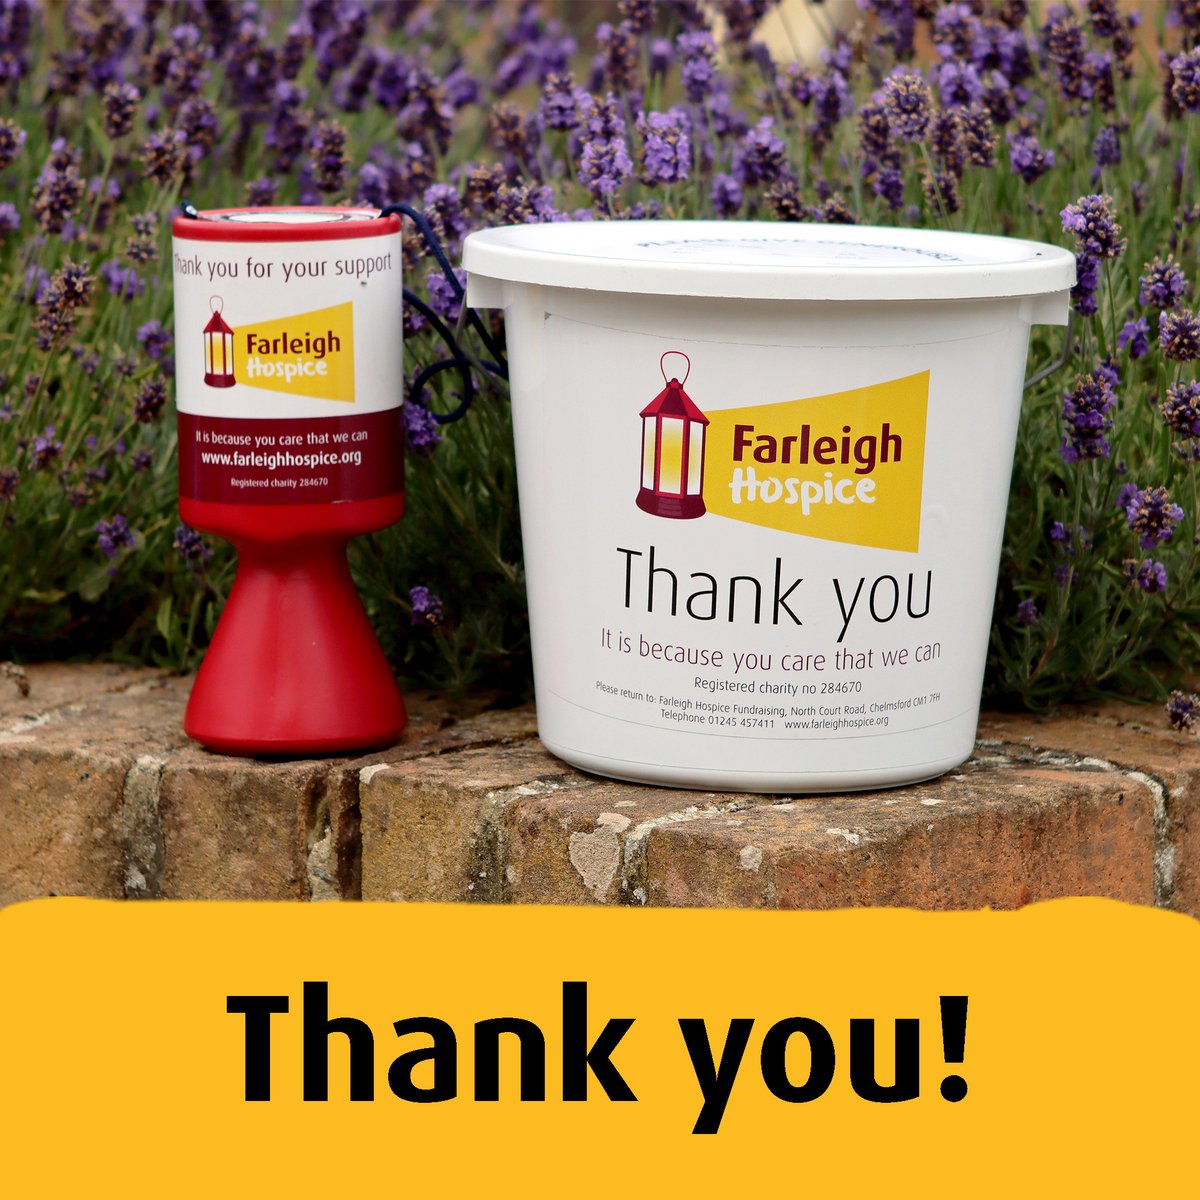 During the financial year of April 23-24, an incredible sum of £15,982.22 was generously donated via our collection tins. If you have space for one of our collection tins, we would love to hear from you. Please contact the Fundraising Team at fundraising@farleighhospice.org.🙏❤️